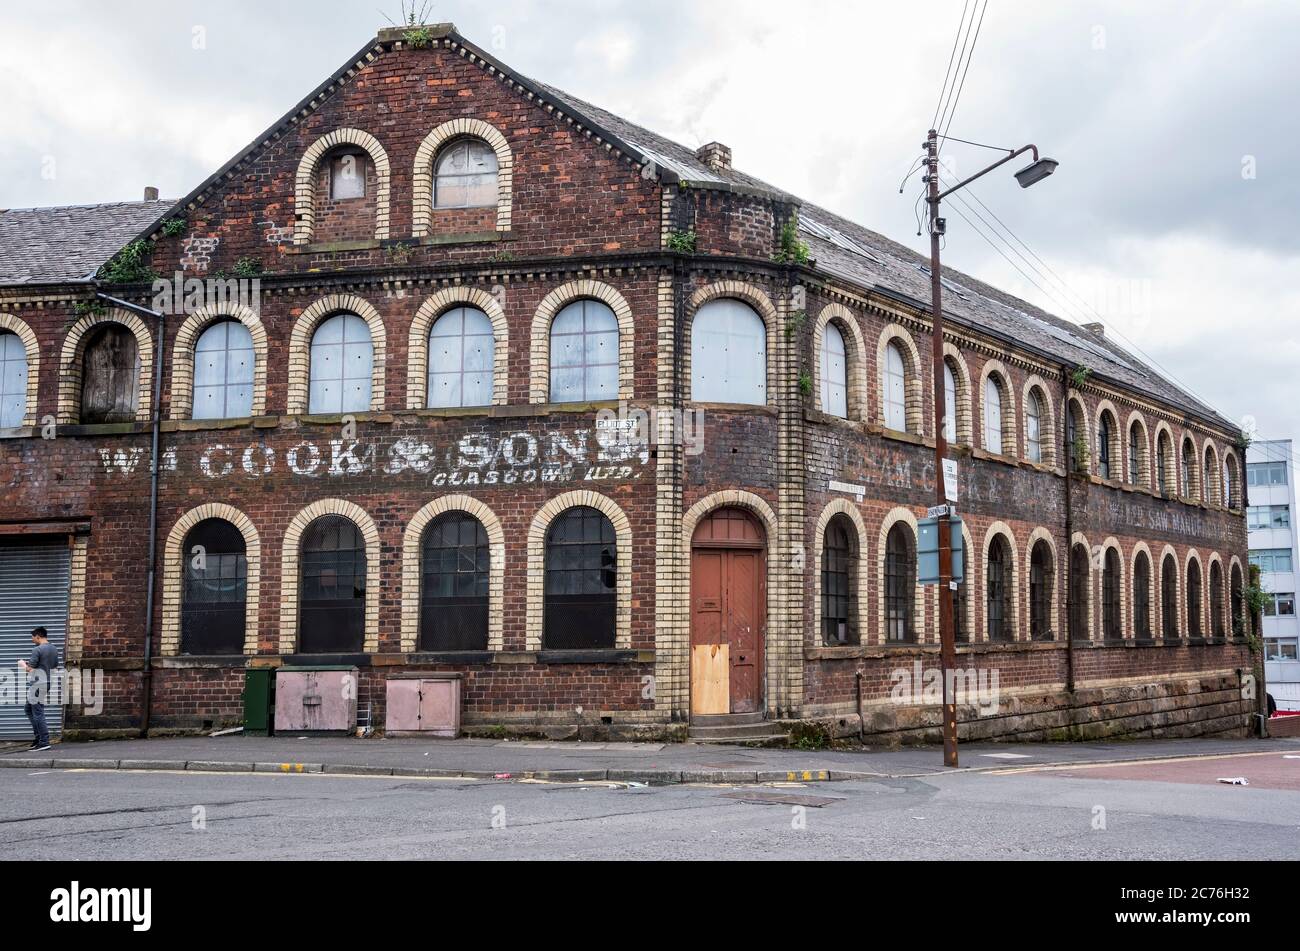 Ghost Sign on derelict premises of Wm Cook & sons former Toolmakers in Anderston area of Glasgow. Stock Photo